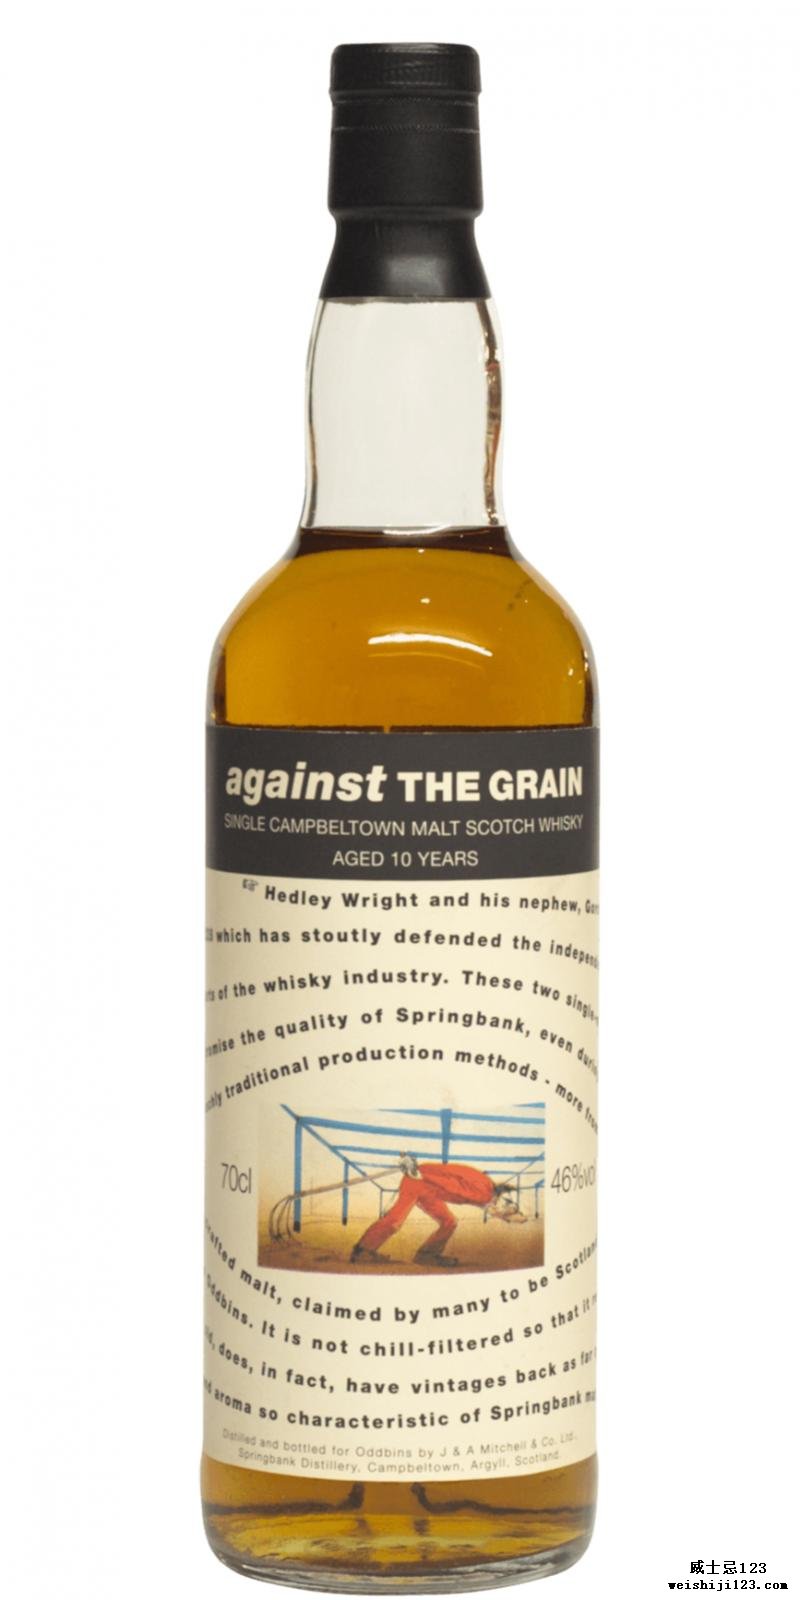 Against the Grain 10-year-old OD